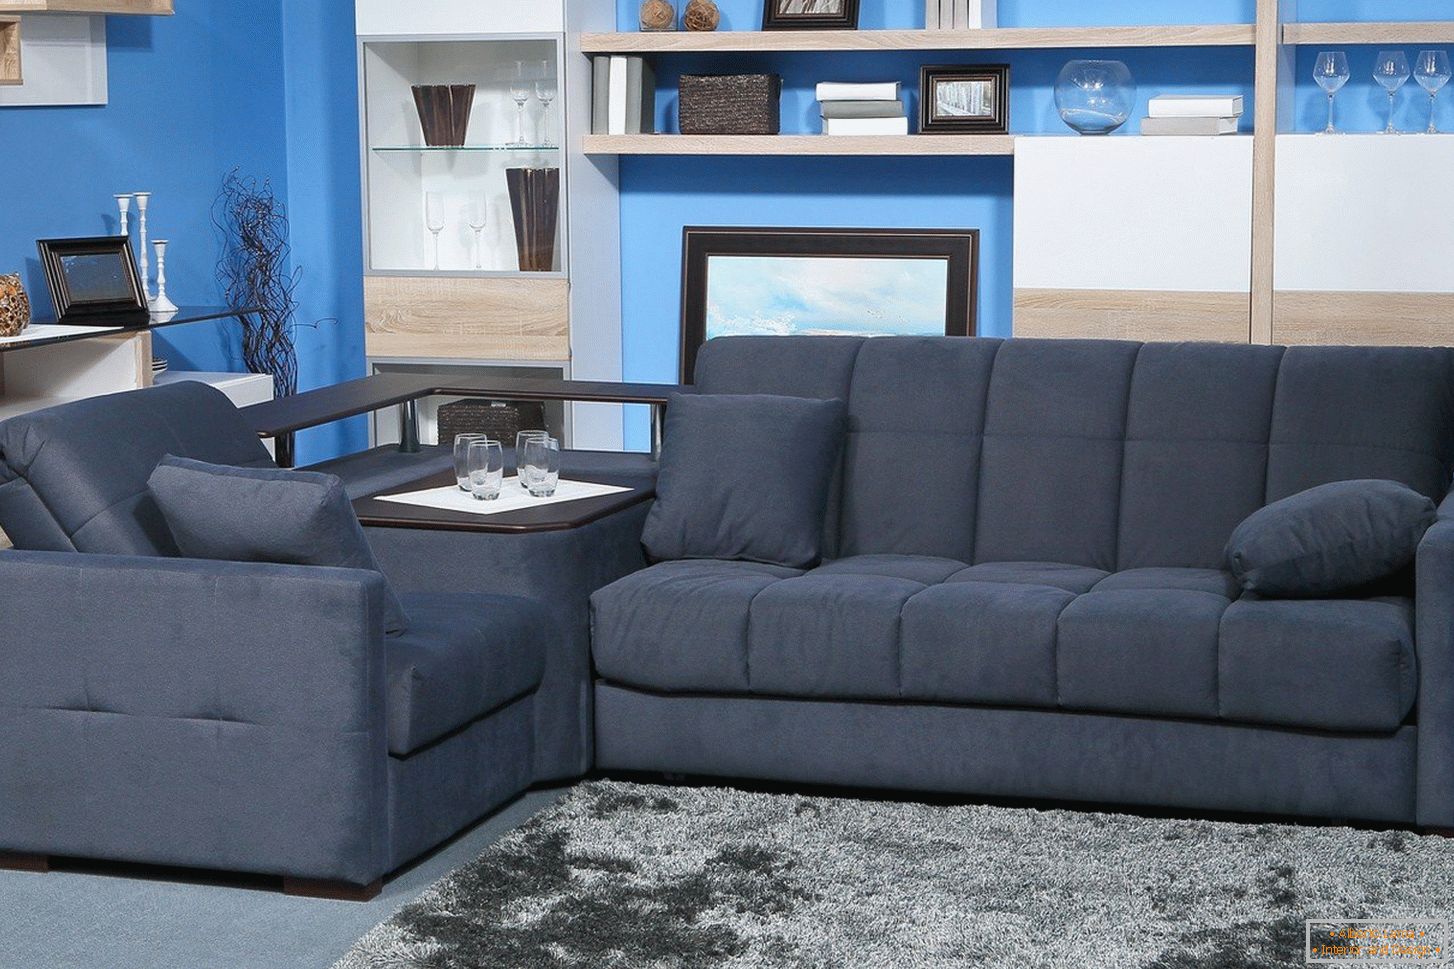 Gray sofa in the blue room